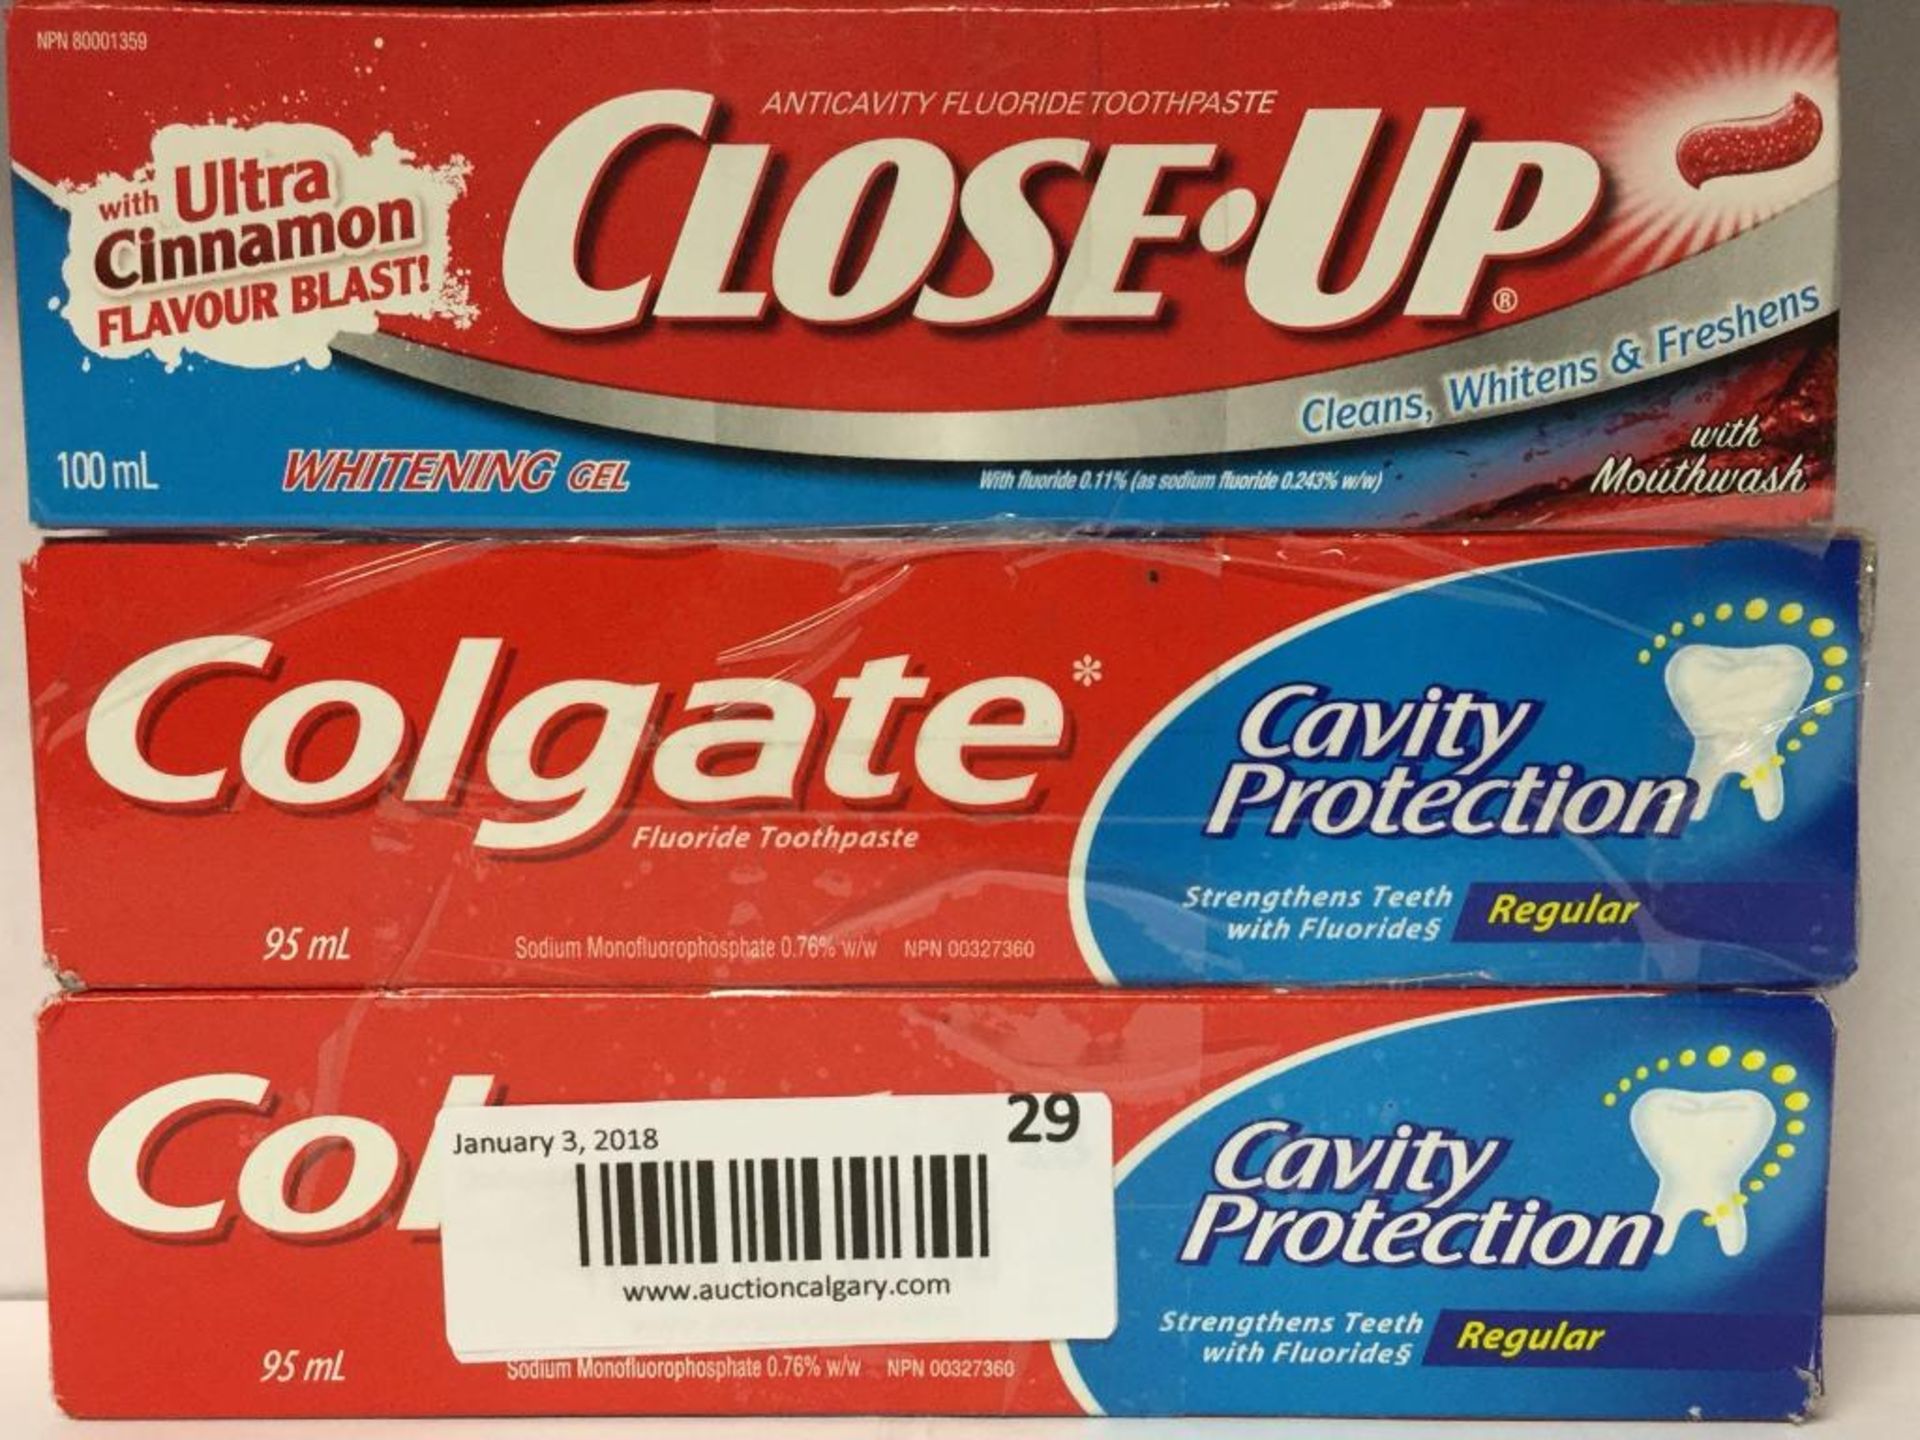 Lot of 3 - 2 x 95 mL Colgate Toothpaste and 1 x 100 mL Close up Toothpaste